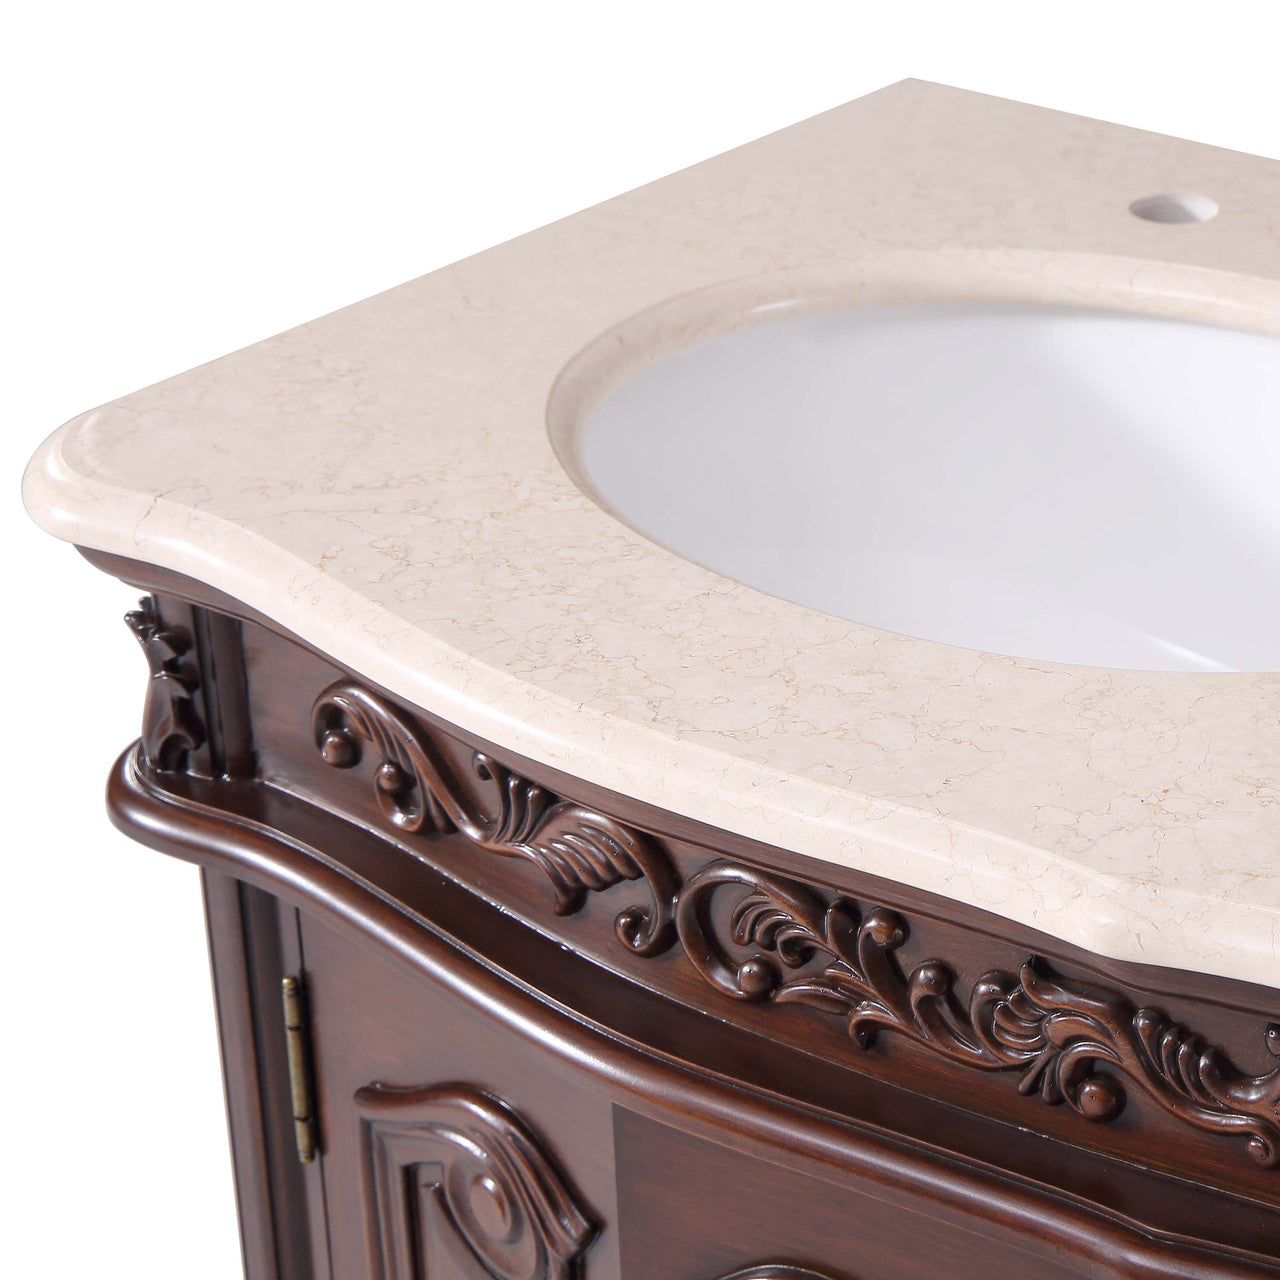 Silkroad 48" Double Sink Cabinet - Crema Marfil Top, Undermount White Ceramic Sinks (3-hole)